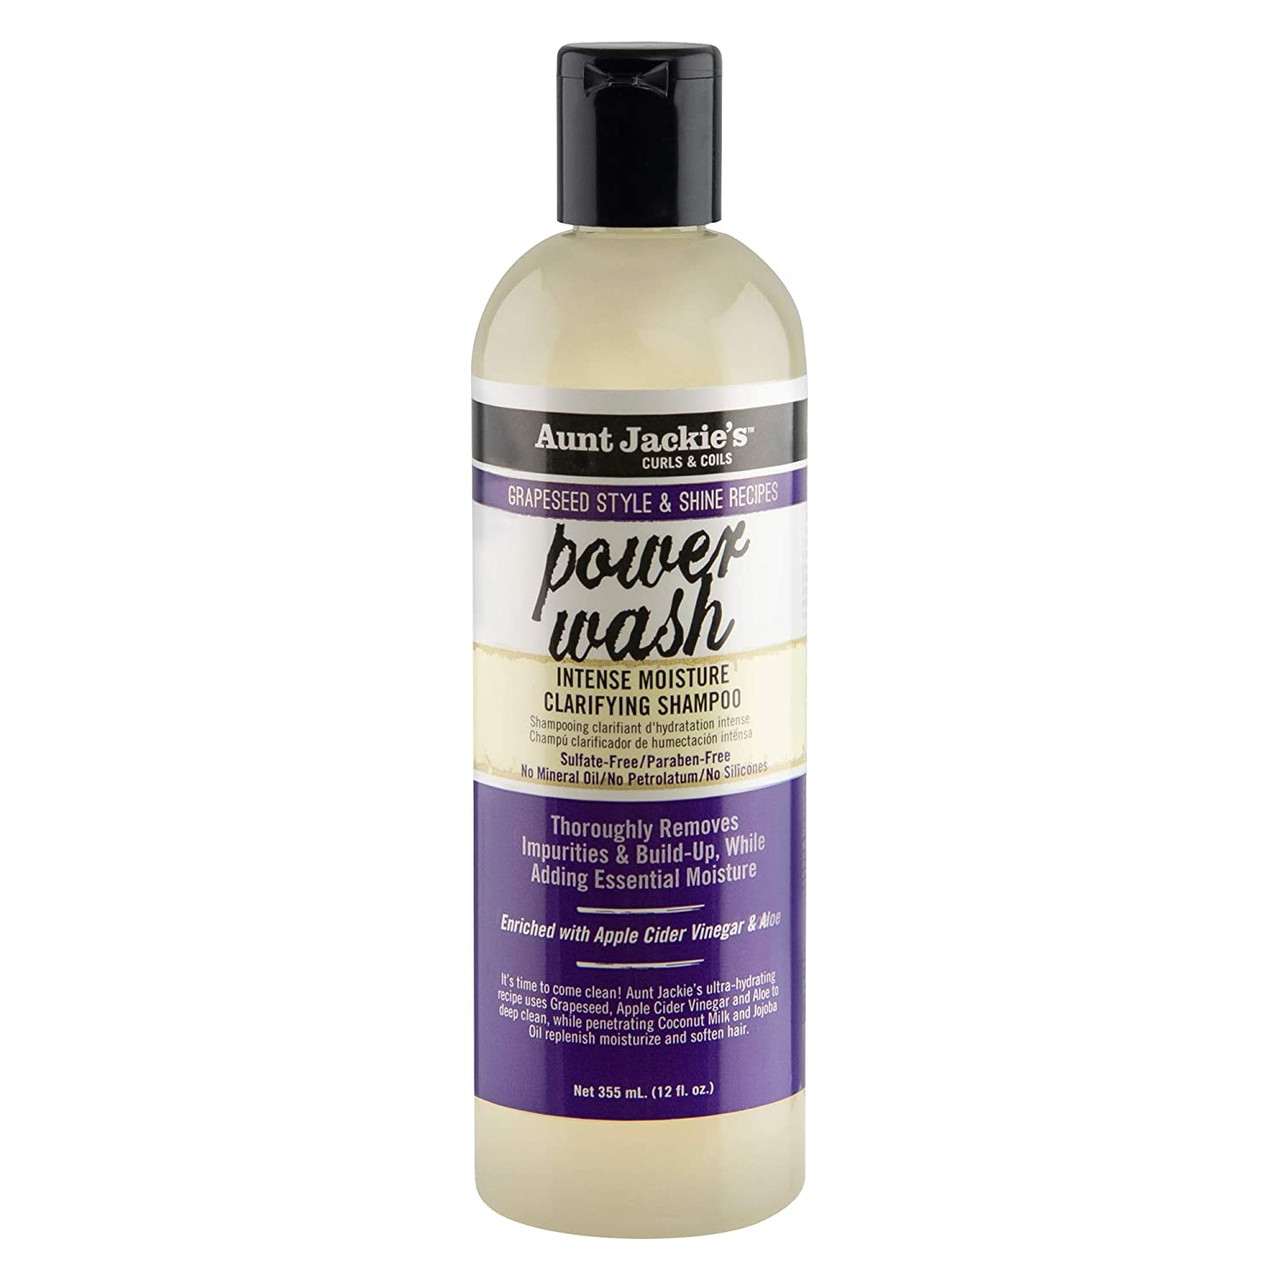 Aunt Jackie's Grapeseed Style & Shine Recipes WASH Intense Moisture Shampoo (12 oz.) NaturallyCurly